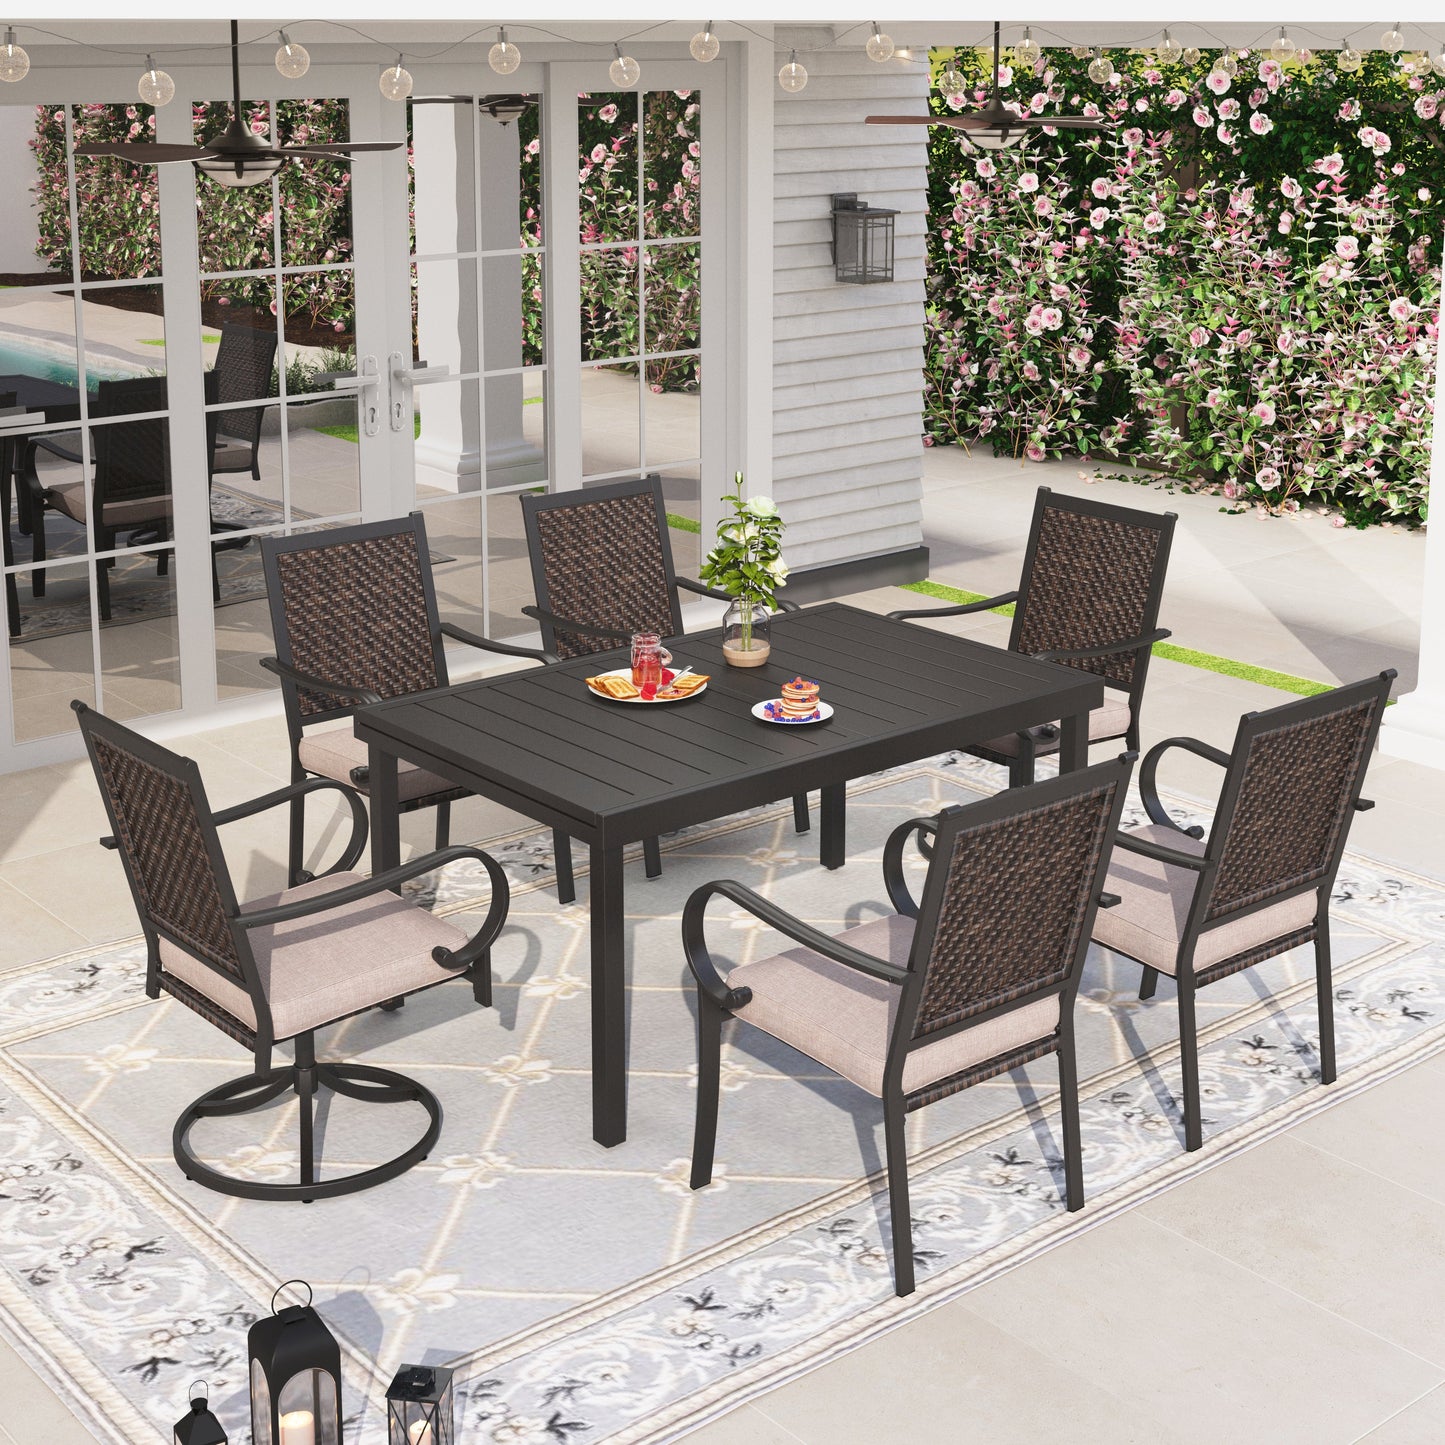 Sophia & William 7 Pieces Outdoor Patio Dining Set with Swivel & Fixed Wicker Chairs and Extendable Steel Table for 6-person